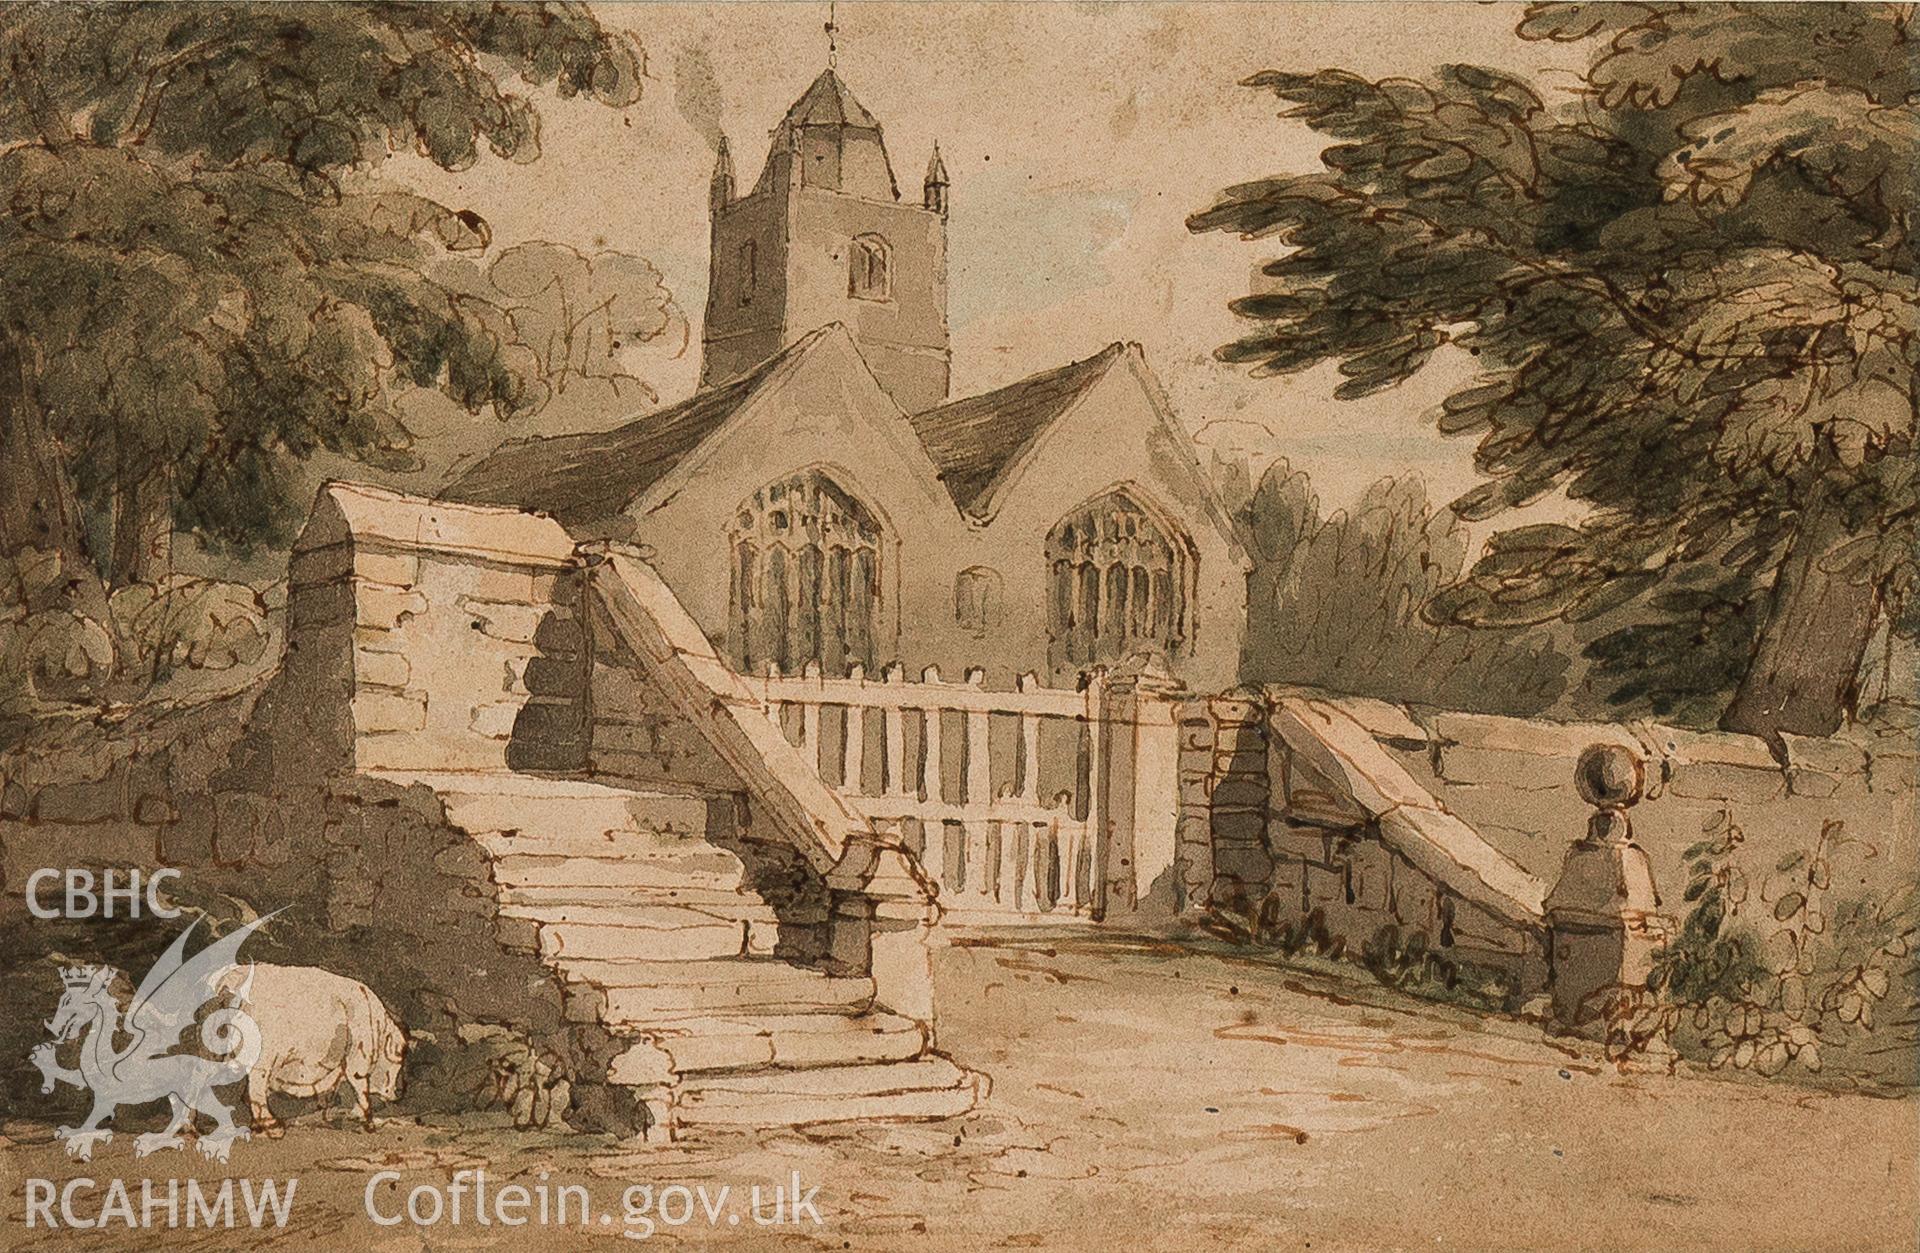 Digital scan of a watercolour of Chirk Church by John Varley dated 1820.